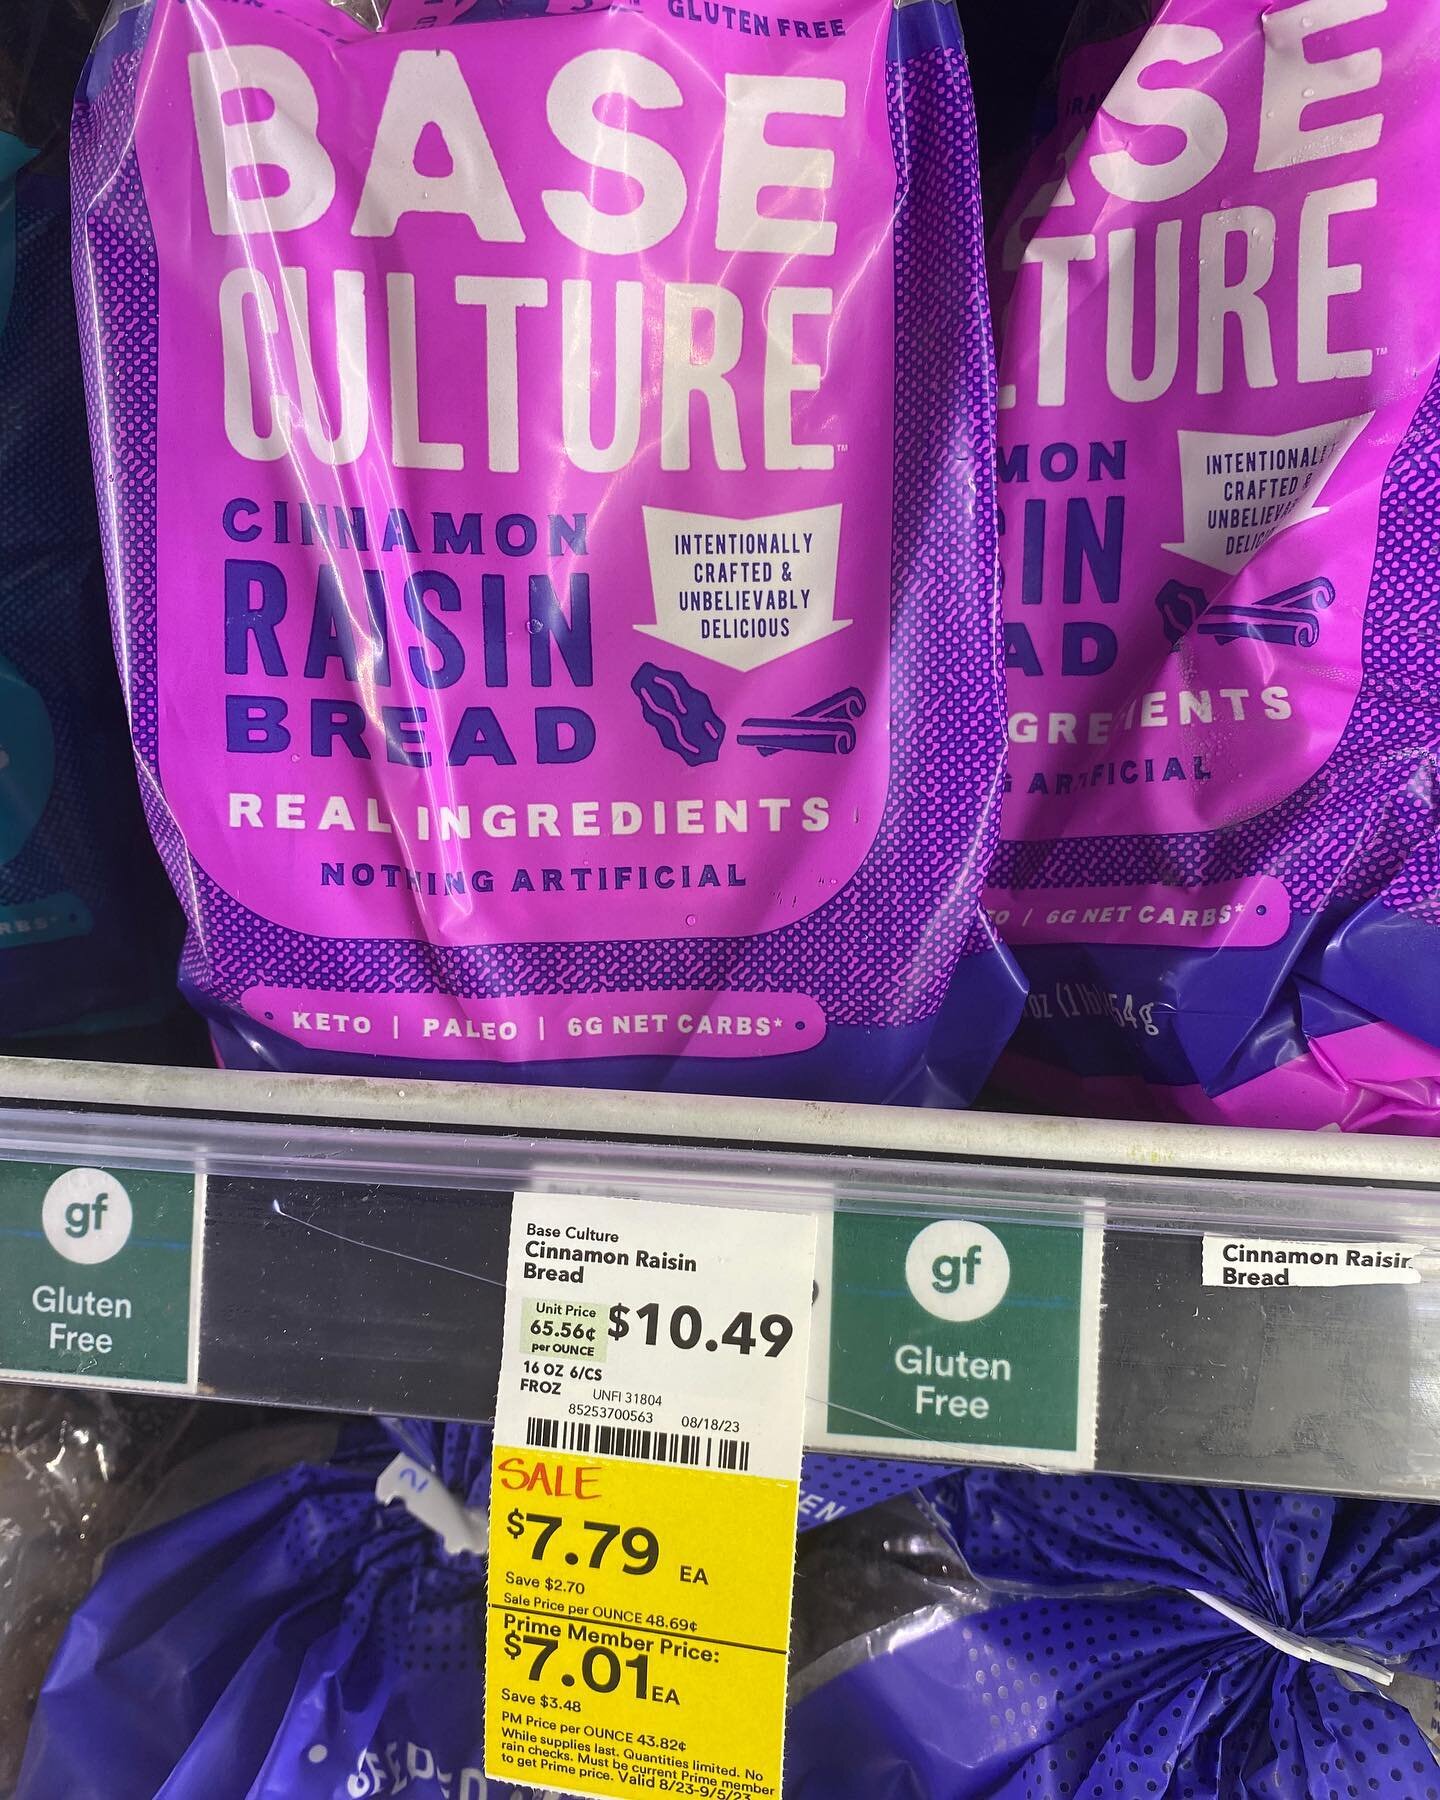 A good deal at Whole Foods today on this @baseculture cinnamon raisin bread. Delicious toasted and topped with almond butter- keeps your blood glucose stable, too. 😋 #growinwellness @grow_in_wellness